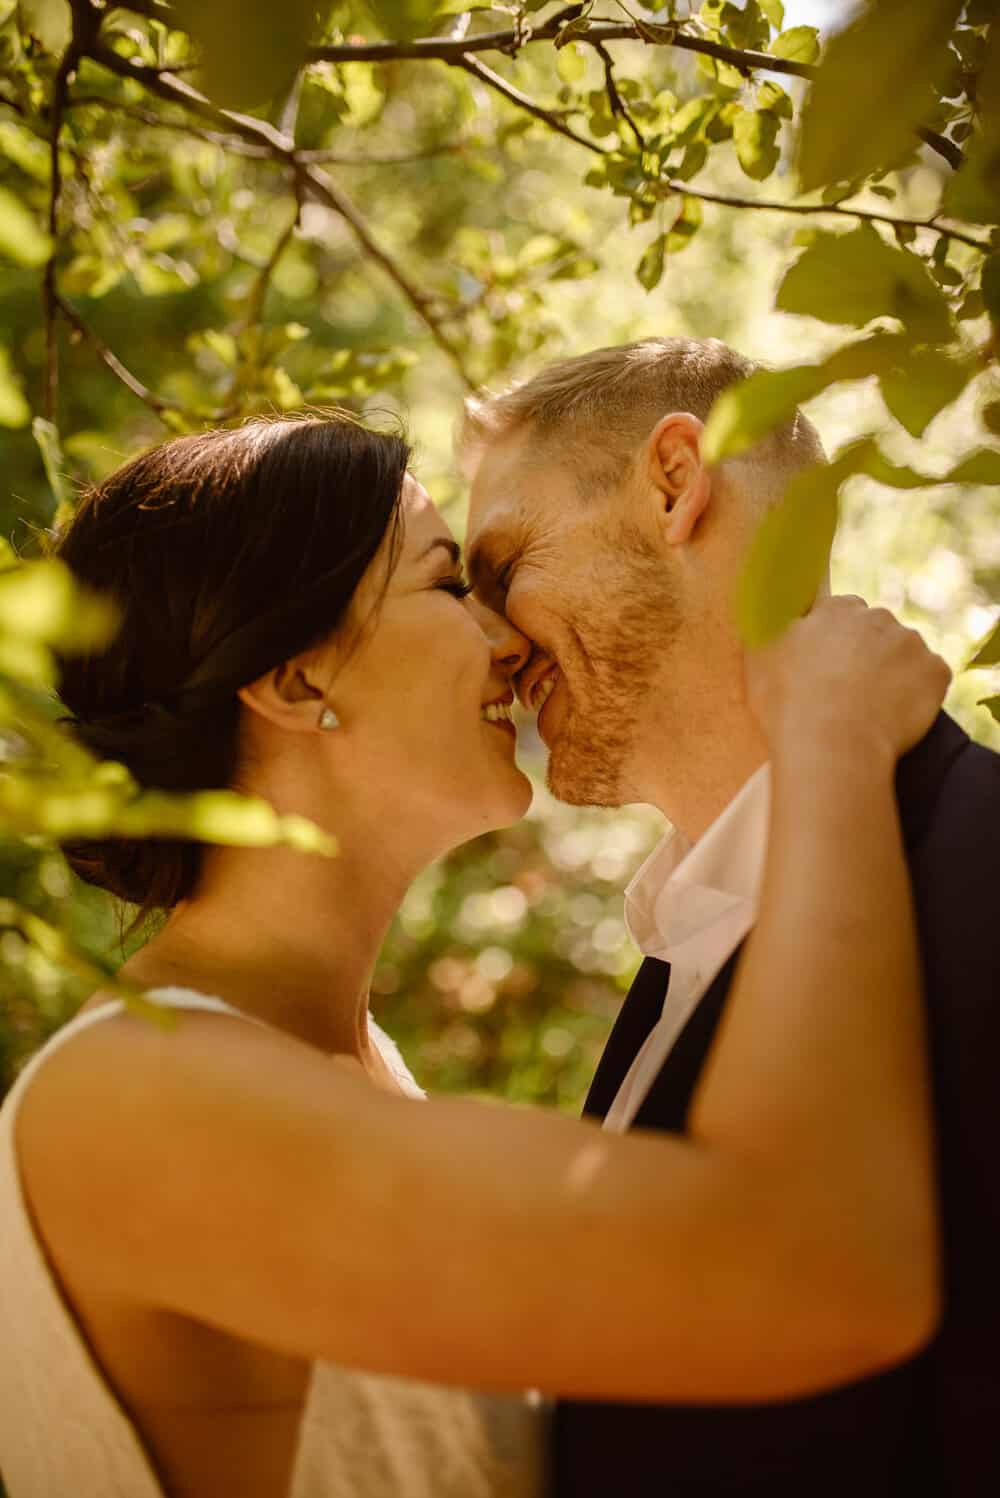 A close up of the couple sharing a kiss near the apple trees. 